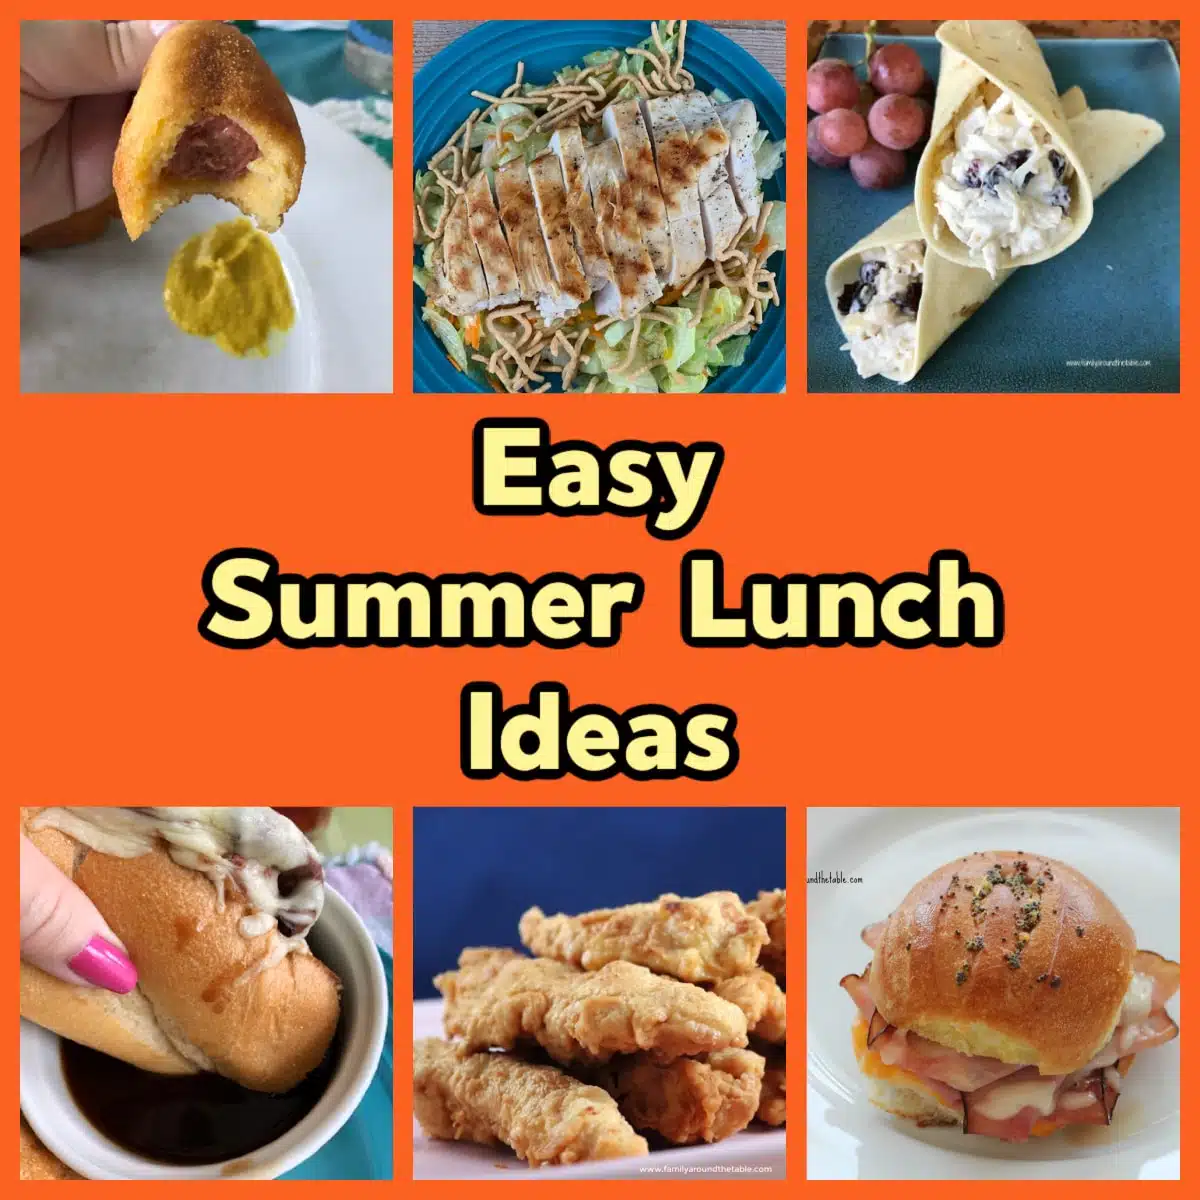 A collage of sandwiches, salads and finger foods for summer lunch ideas.